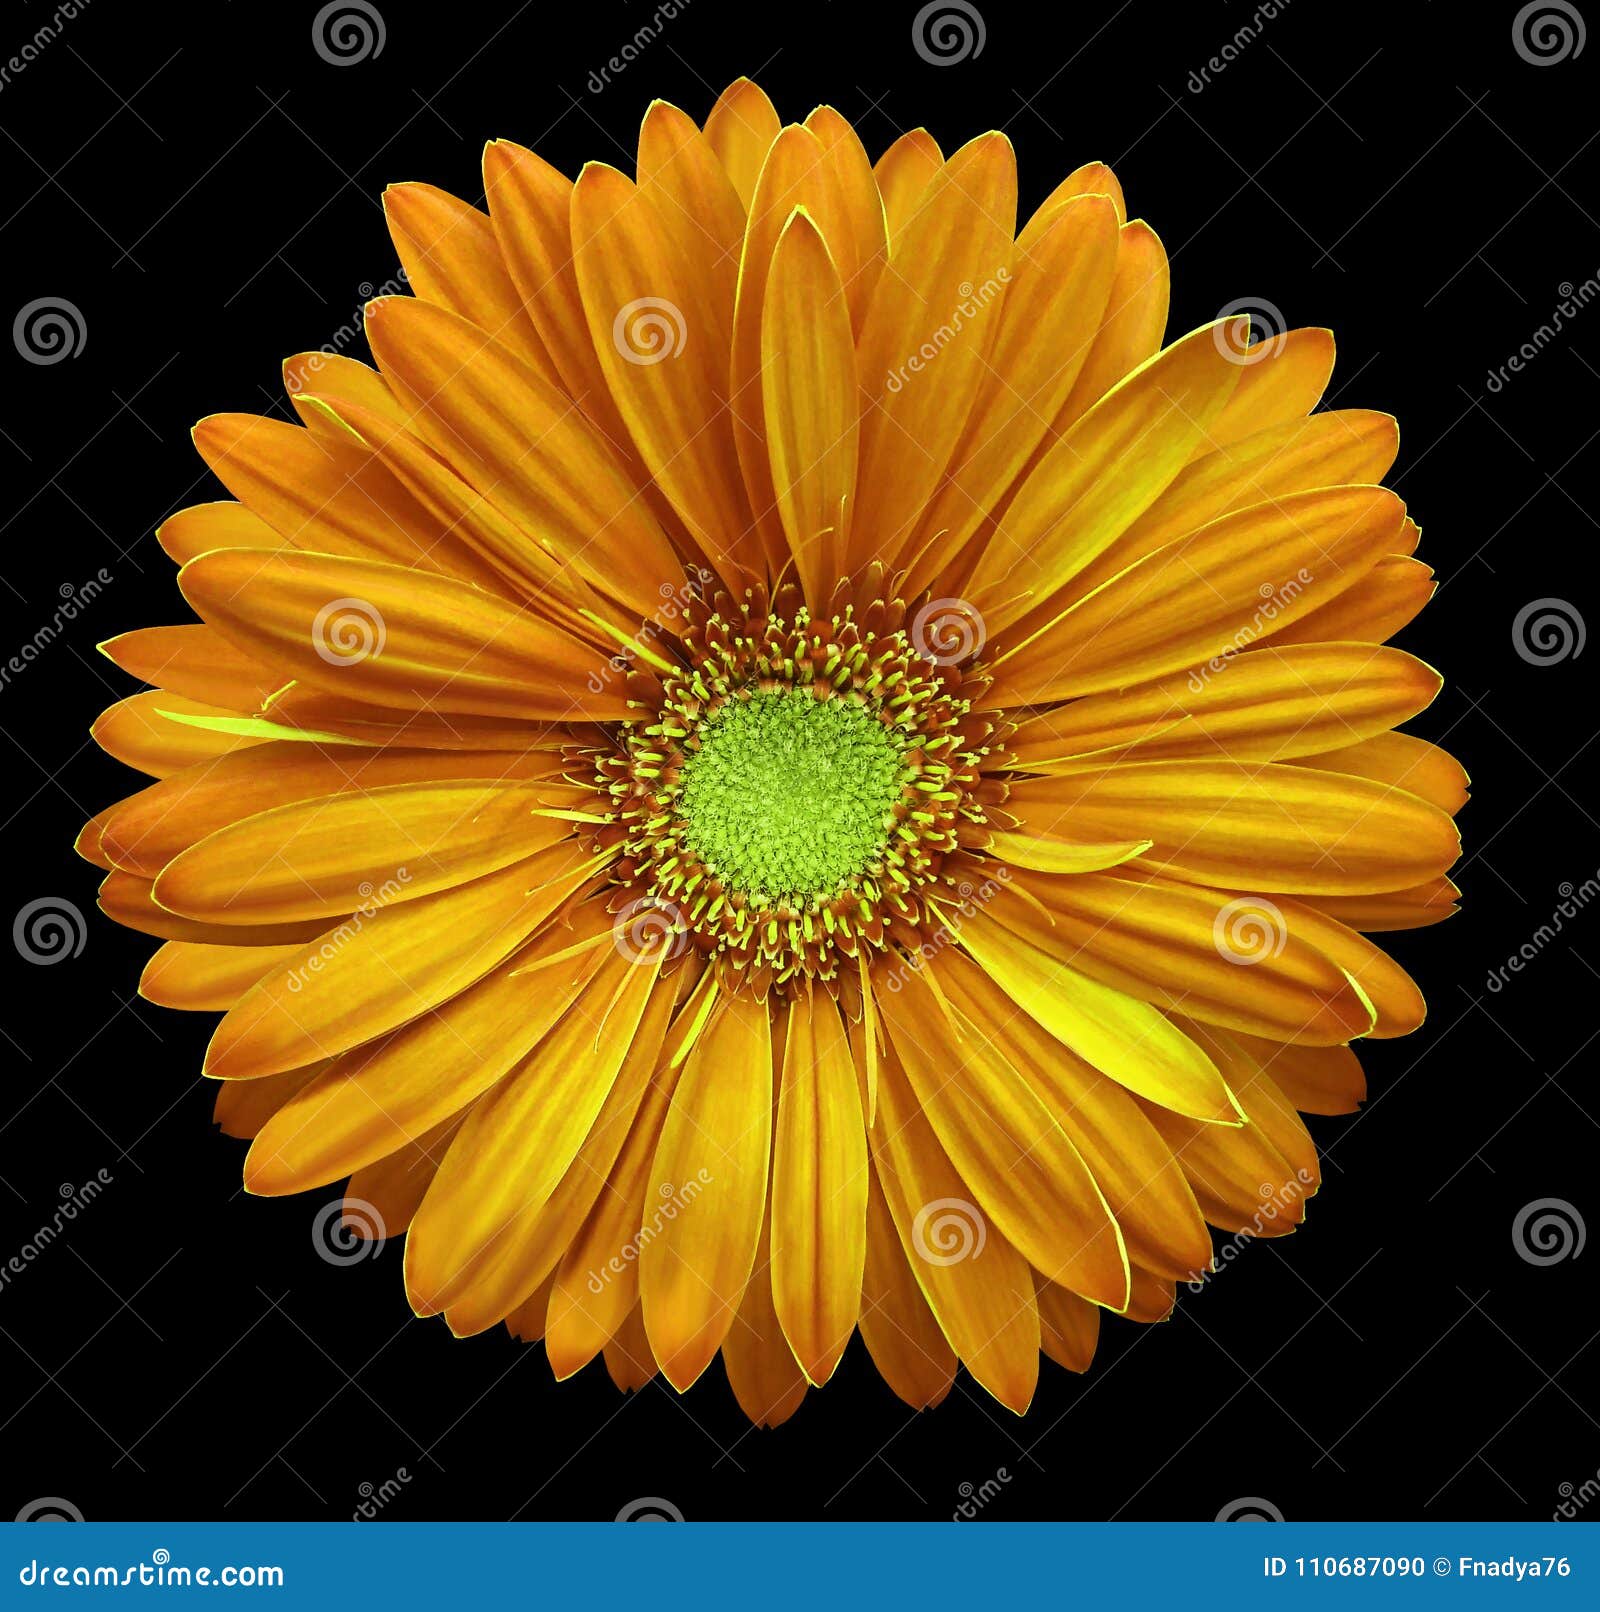 Yellow Orange Gerbera Flower Black Isolated Background With Clipping